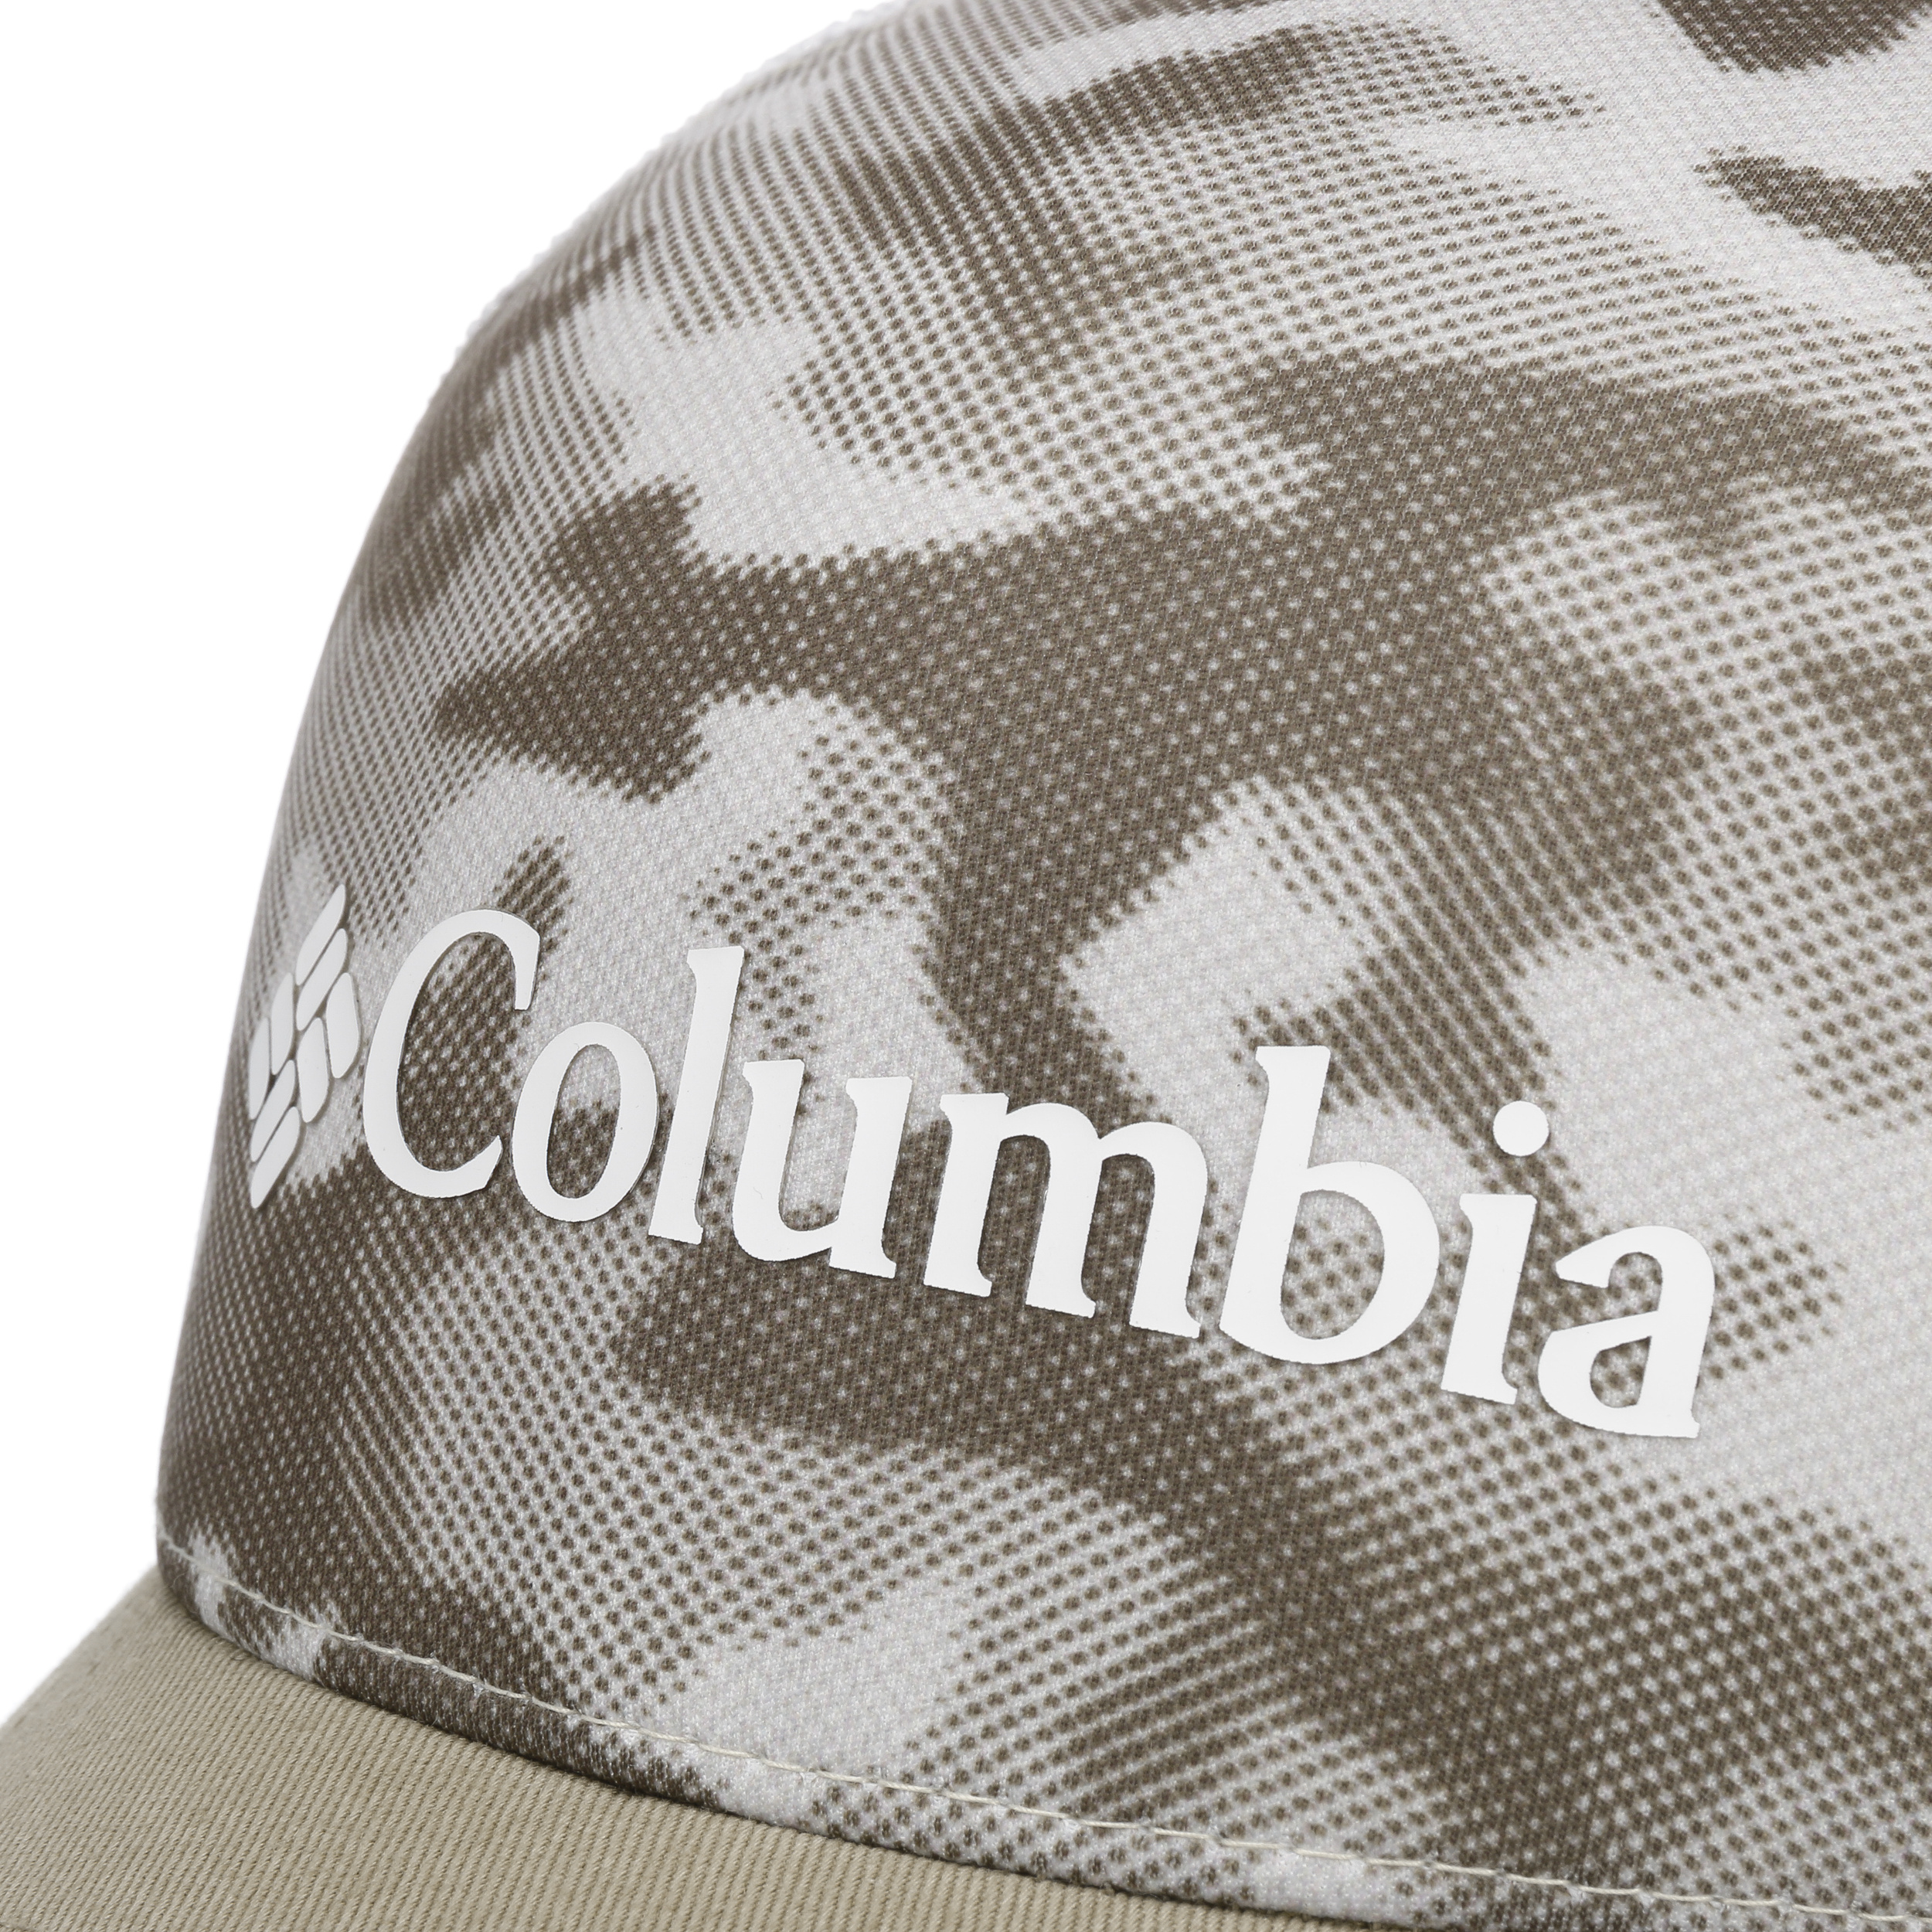 Punchbowl Trucker Cap by Columbia - 29,95 €